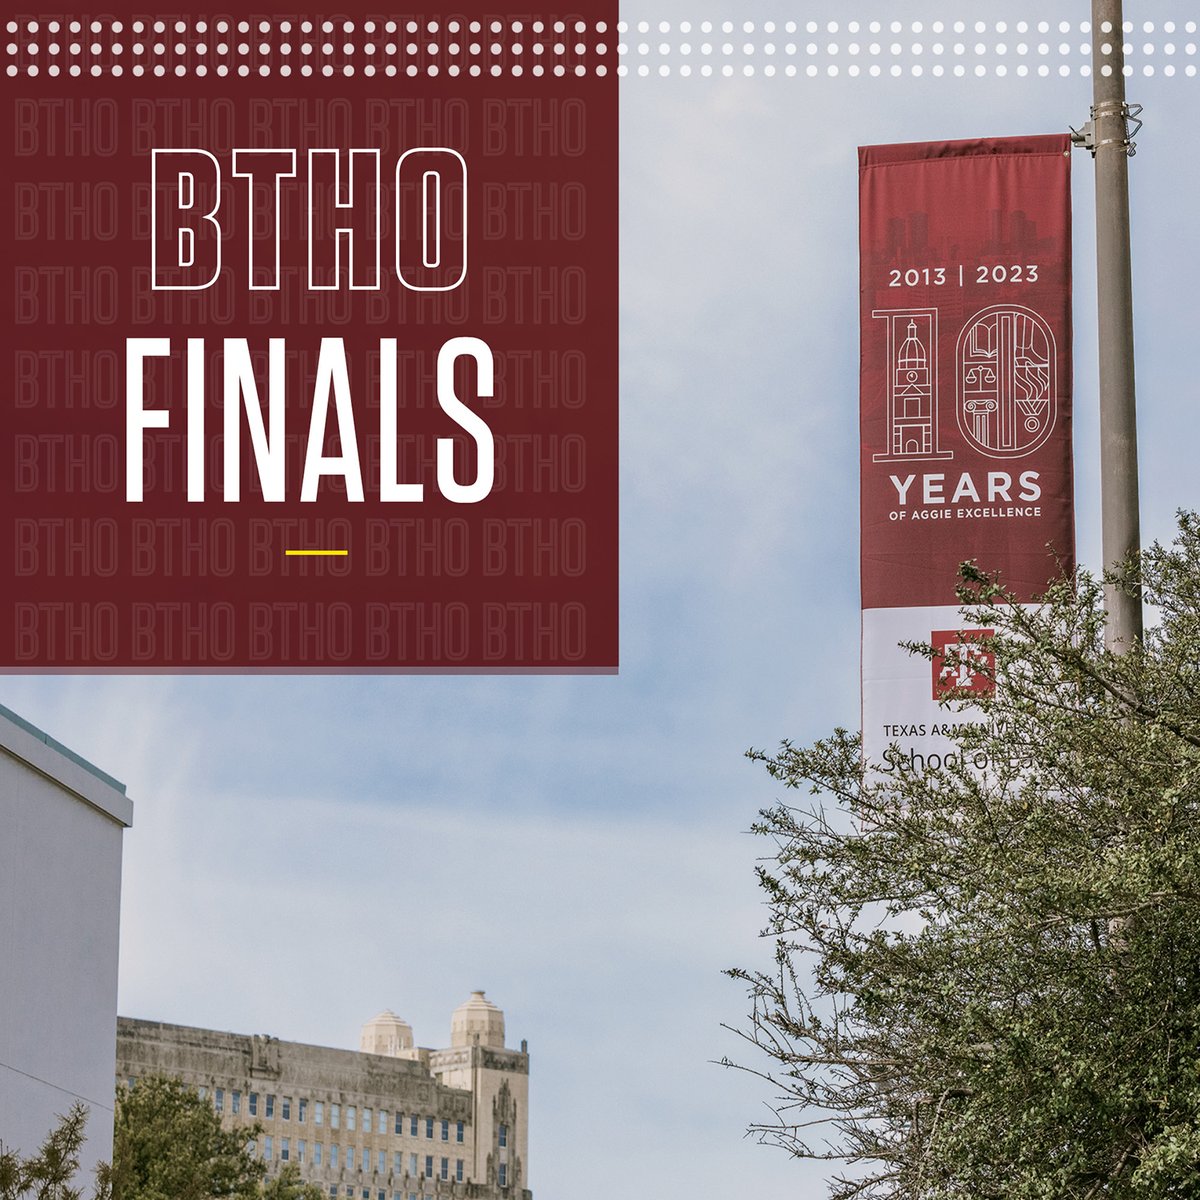 Good luck on your finals, Ags. You've got this!